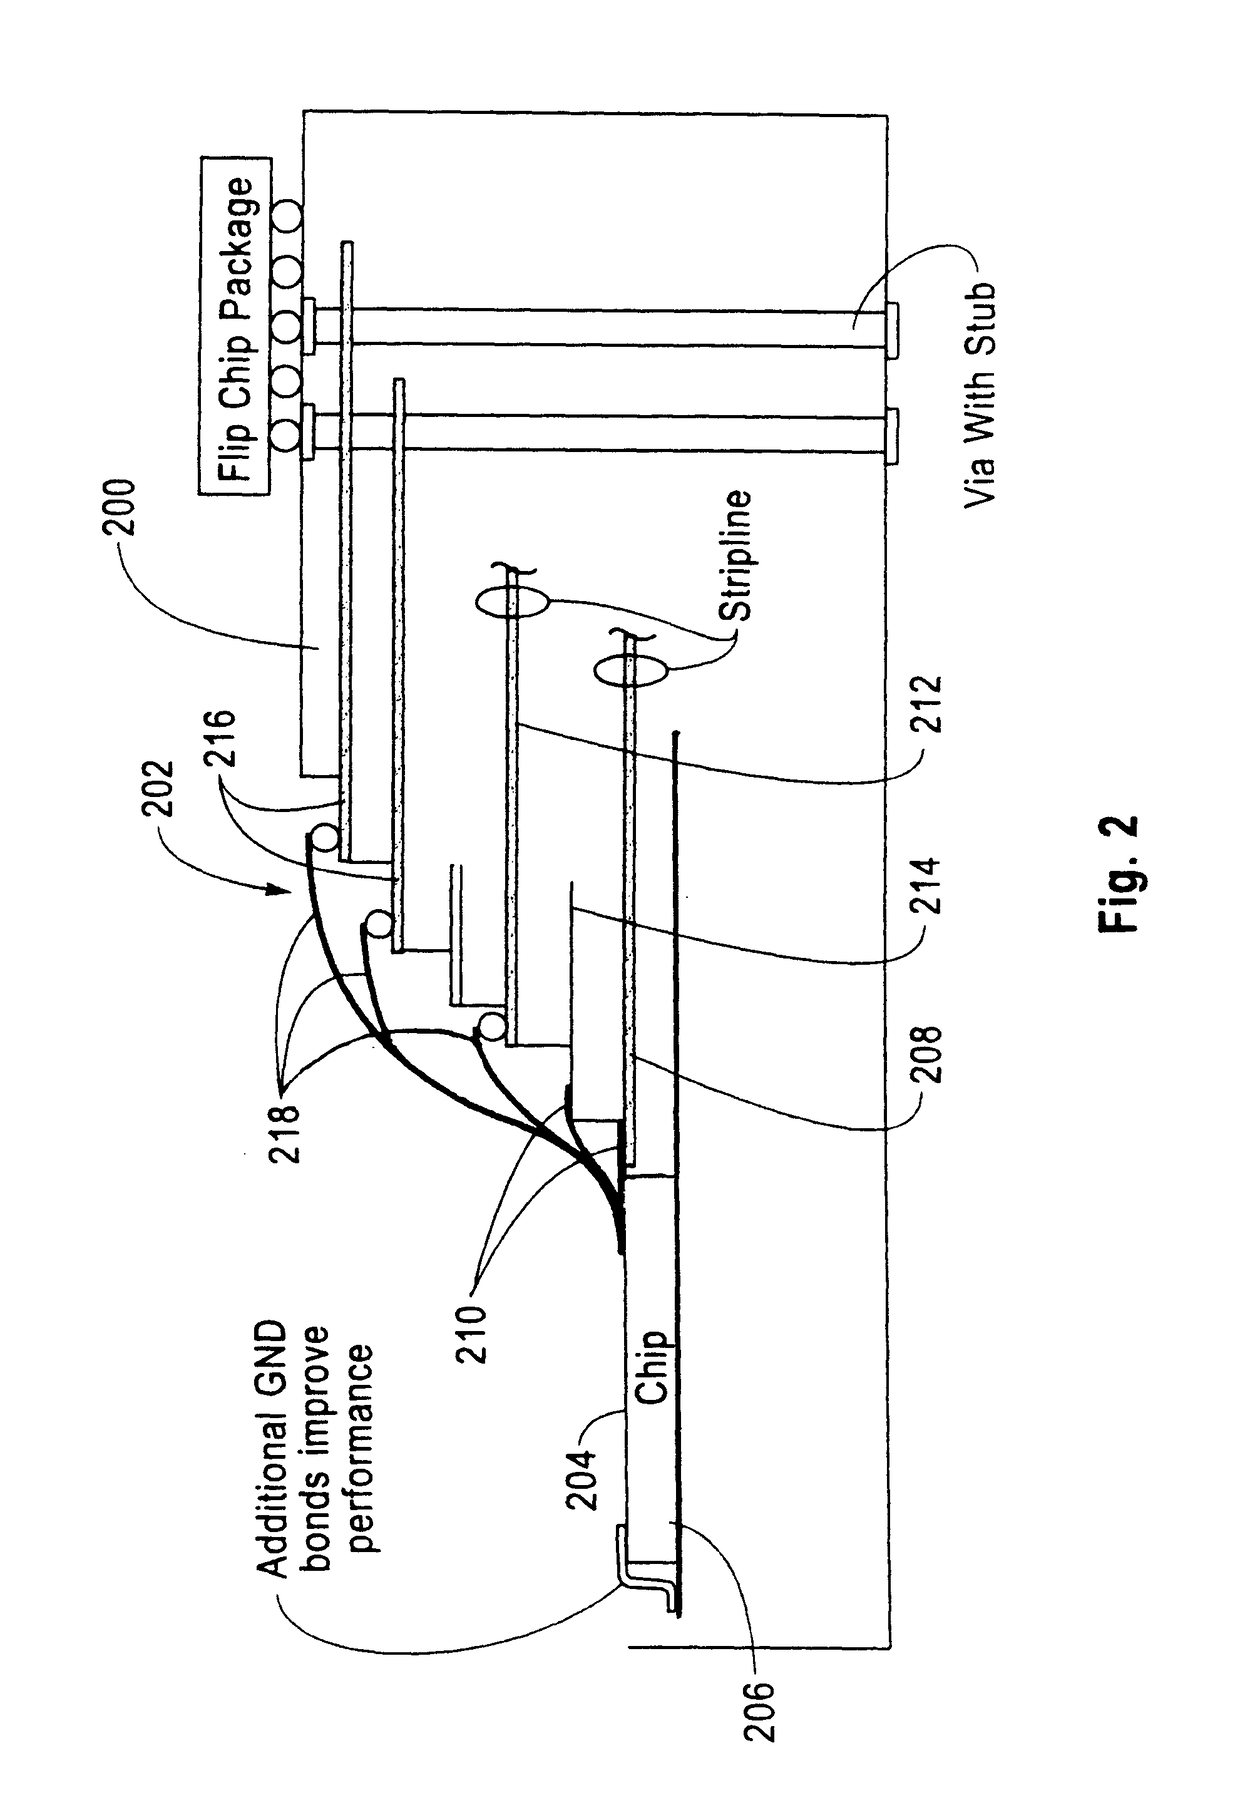 Integrated circuit chip packaging